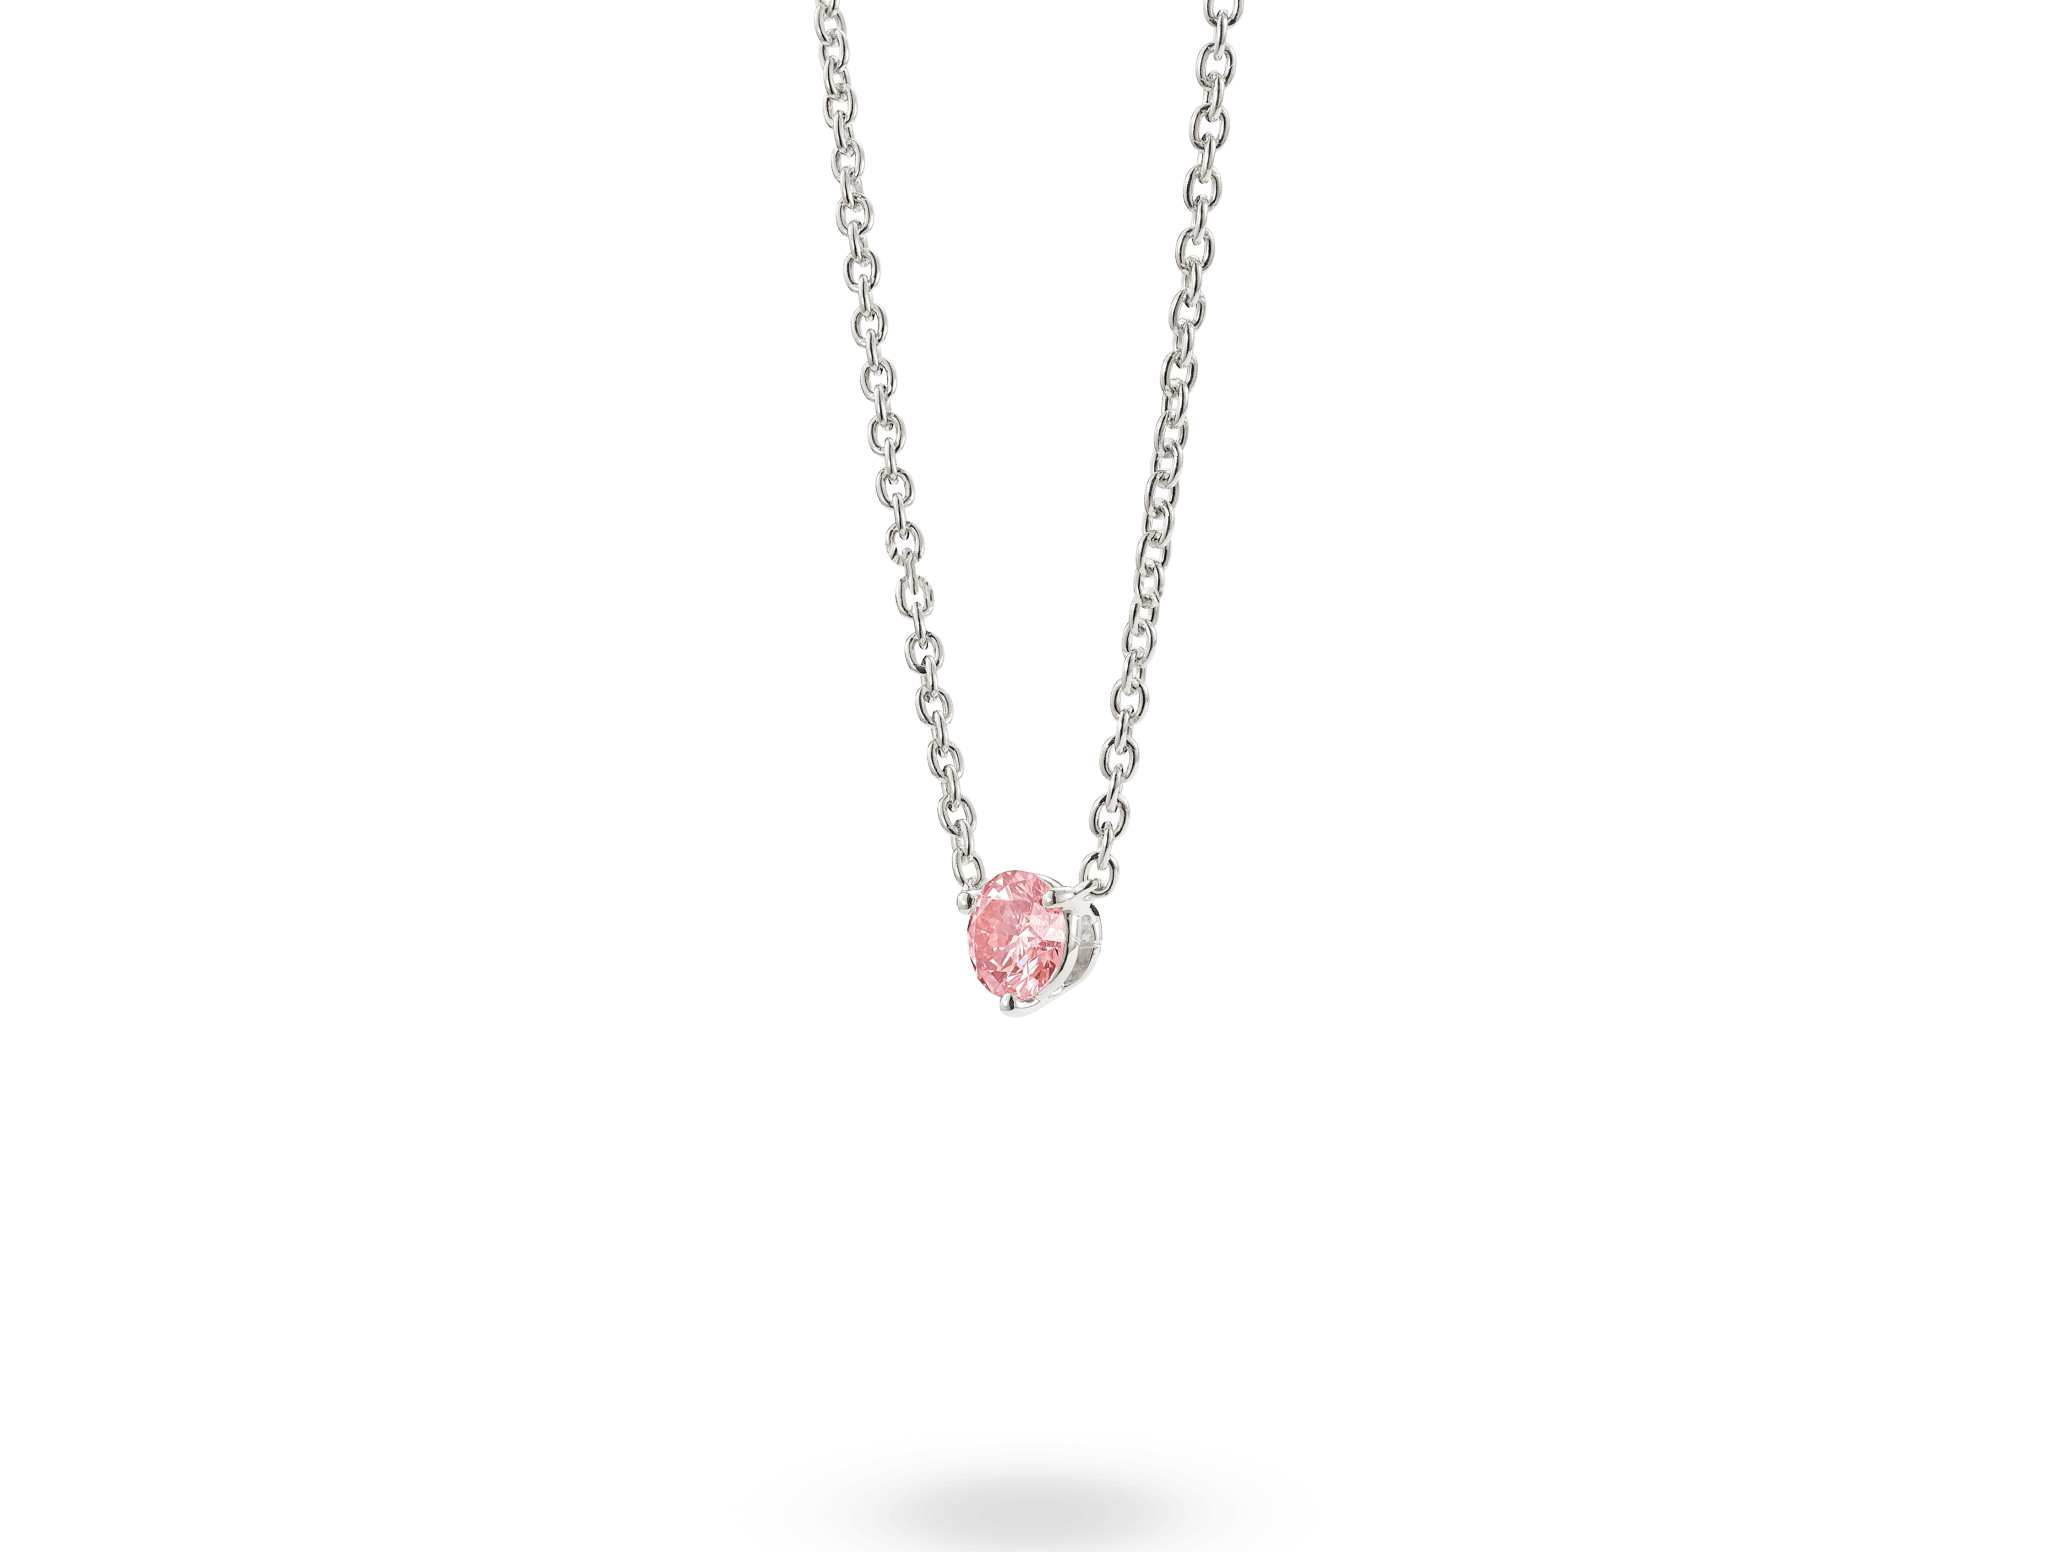 Amazon.com : OBCPD 10 * 12MM Pink Crushed Ice Diamond Necklace for Women  100%-S925 Sterling Silver Jewelry Wedding Gift : Sports & Outdoors